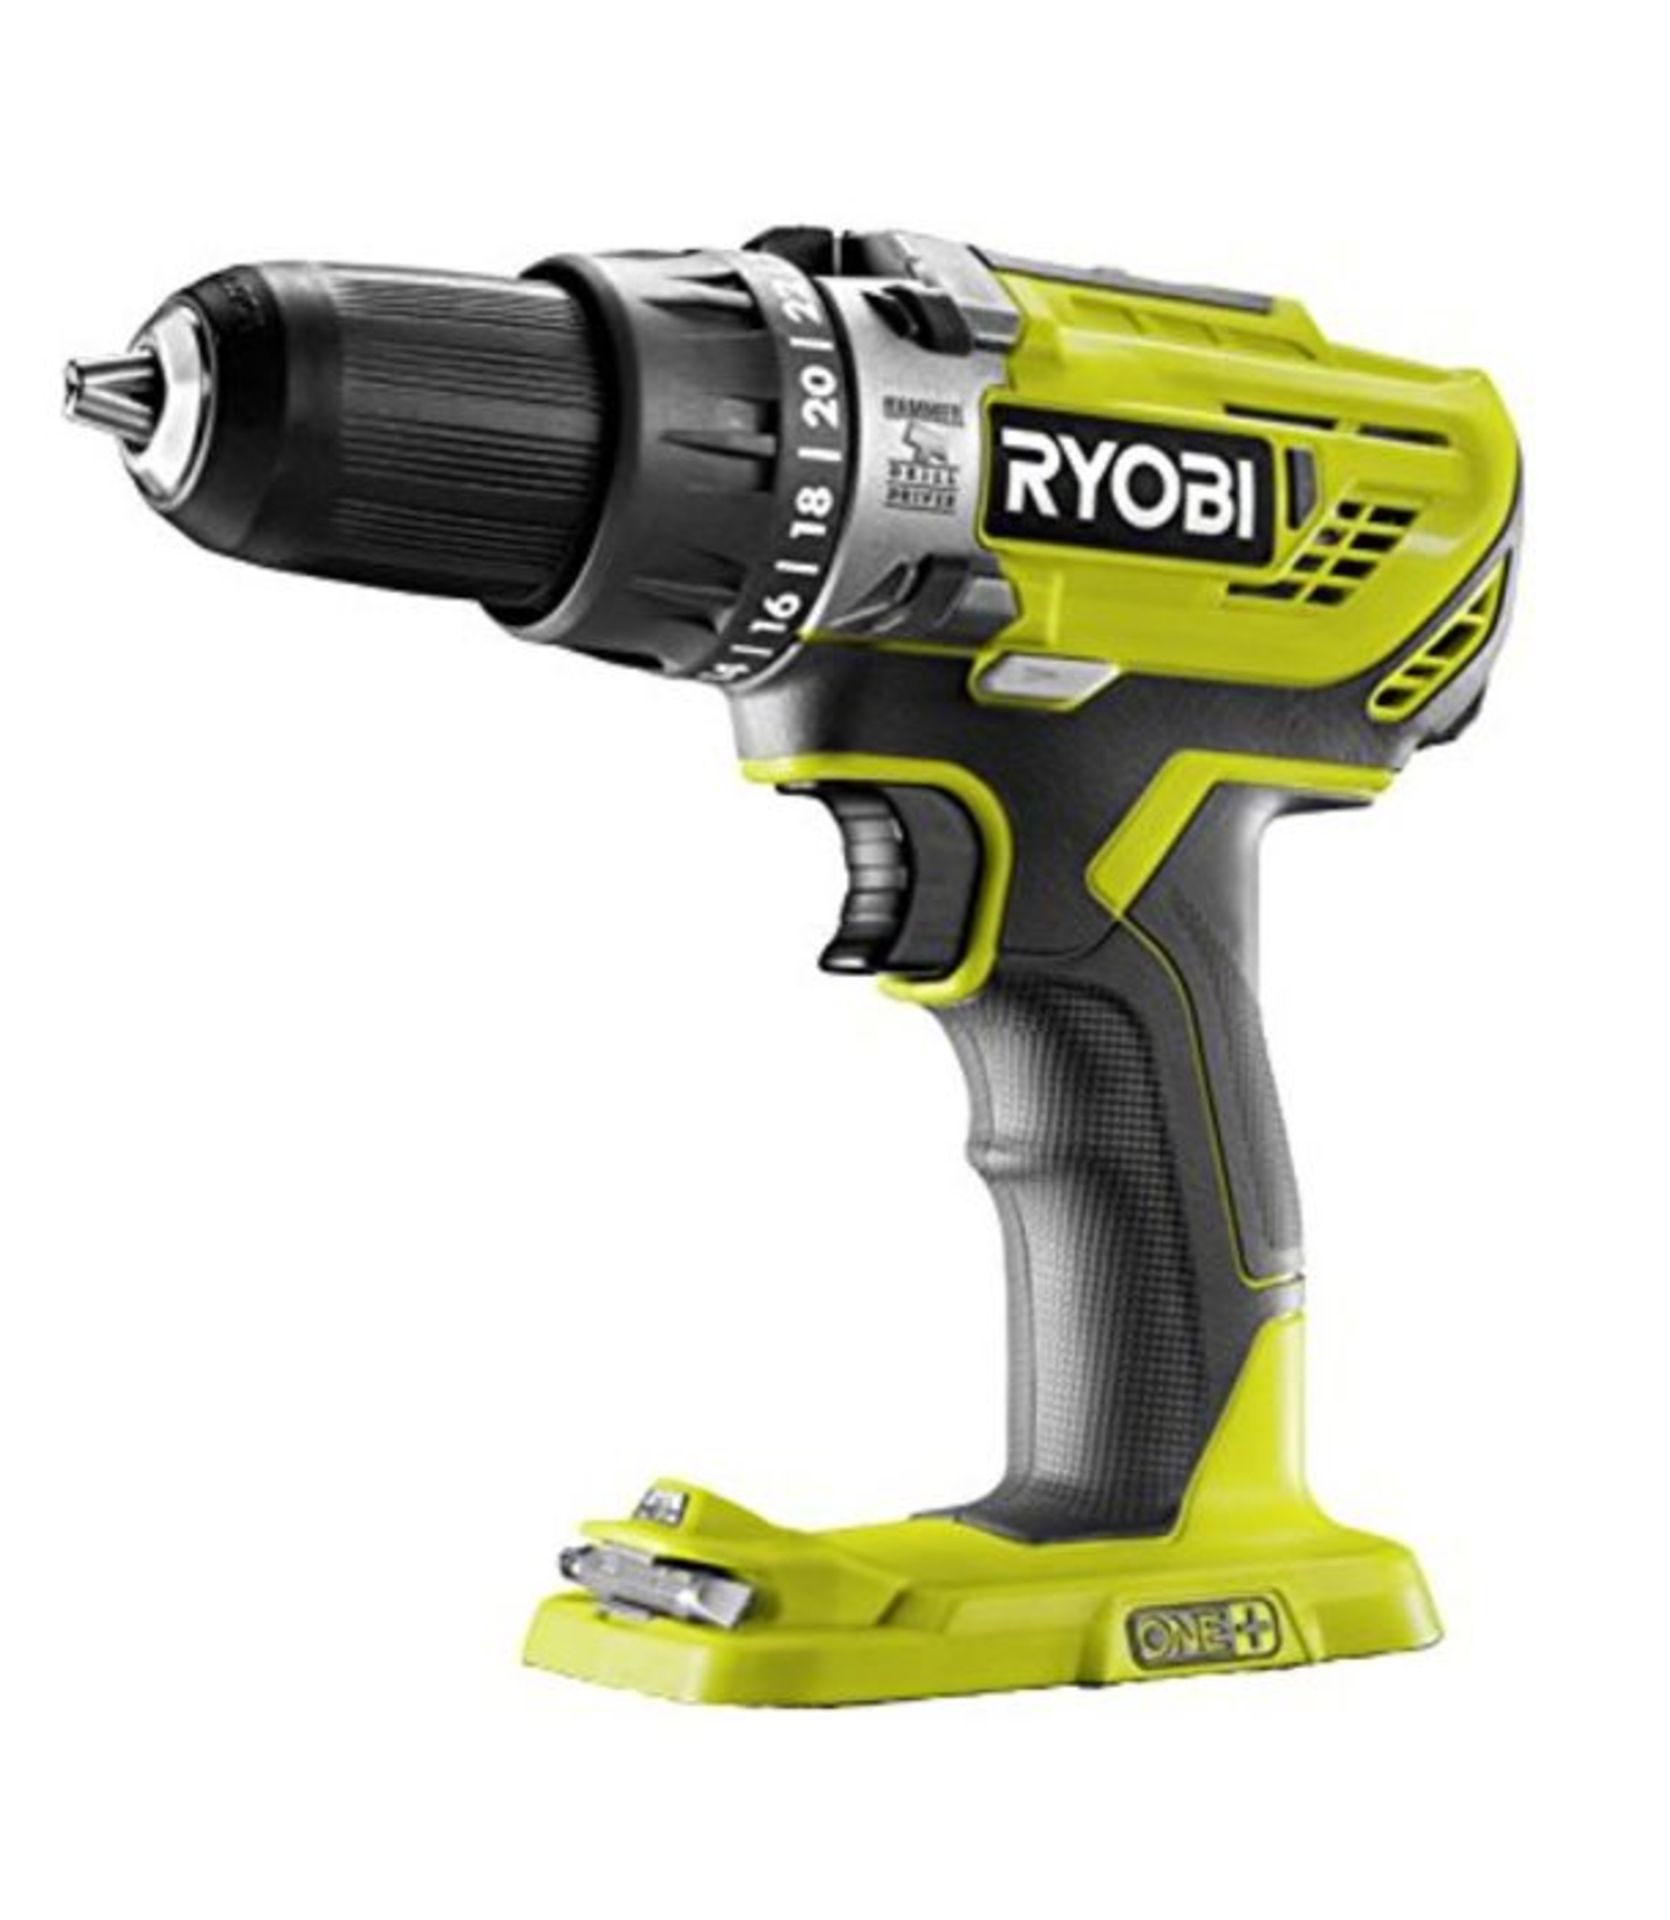 RRP £54.00 Ryobi R18PD3-0 ONE+ 18V Cordless Compact Percussion Drill (Body Only)